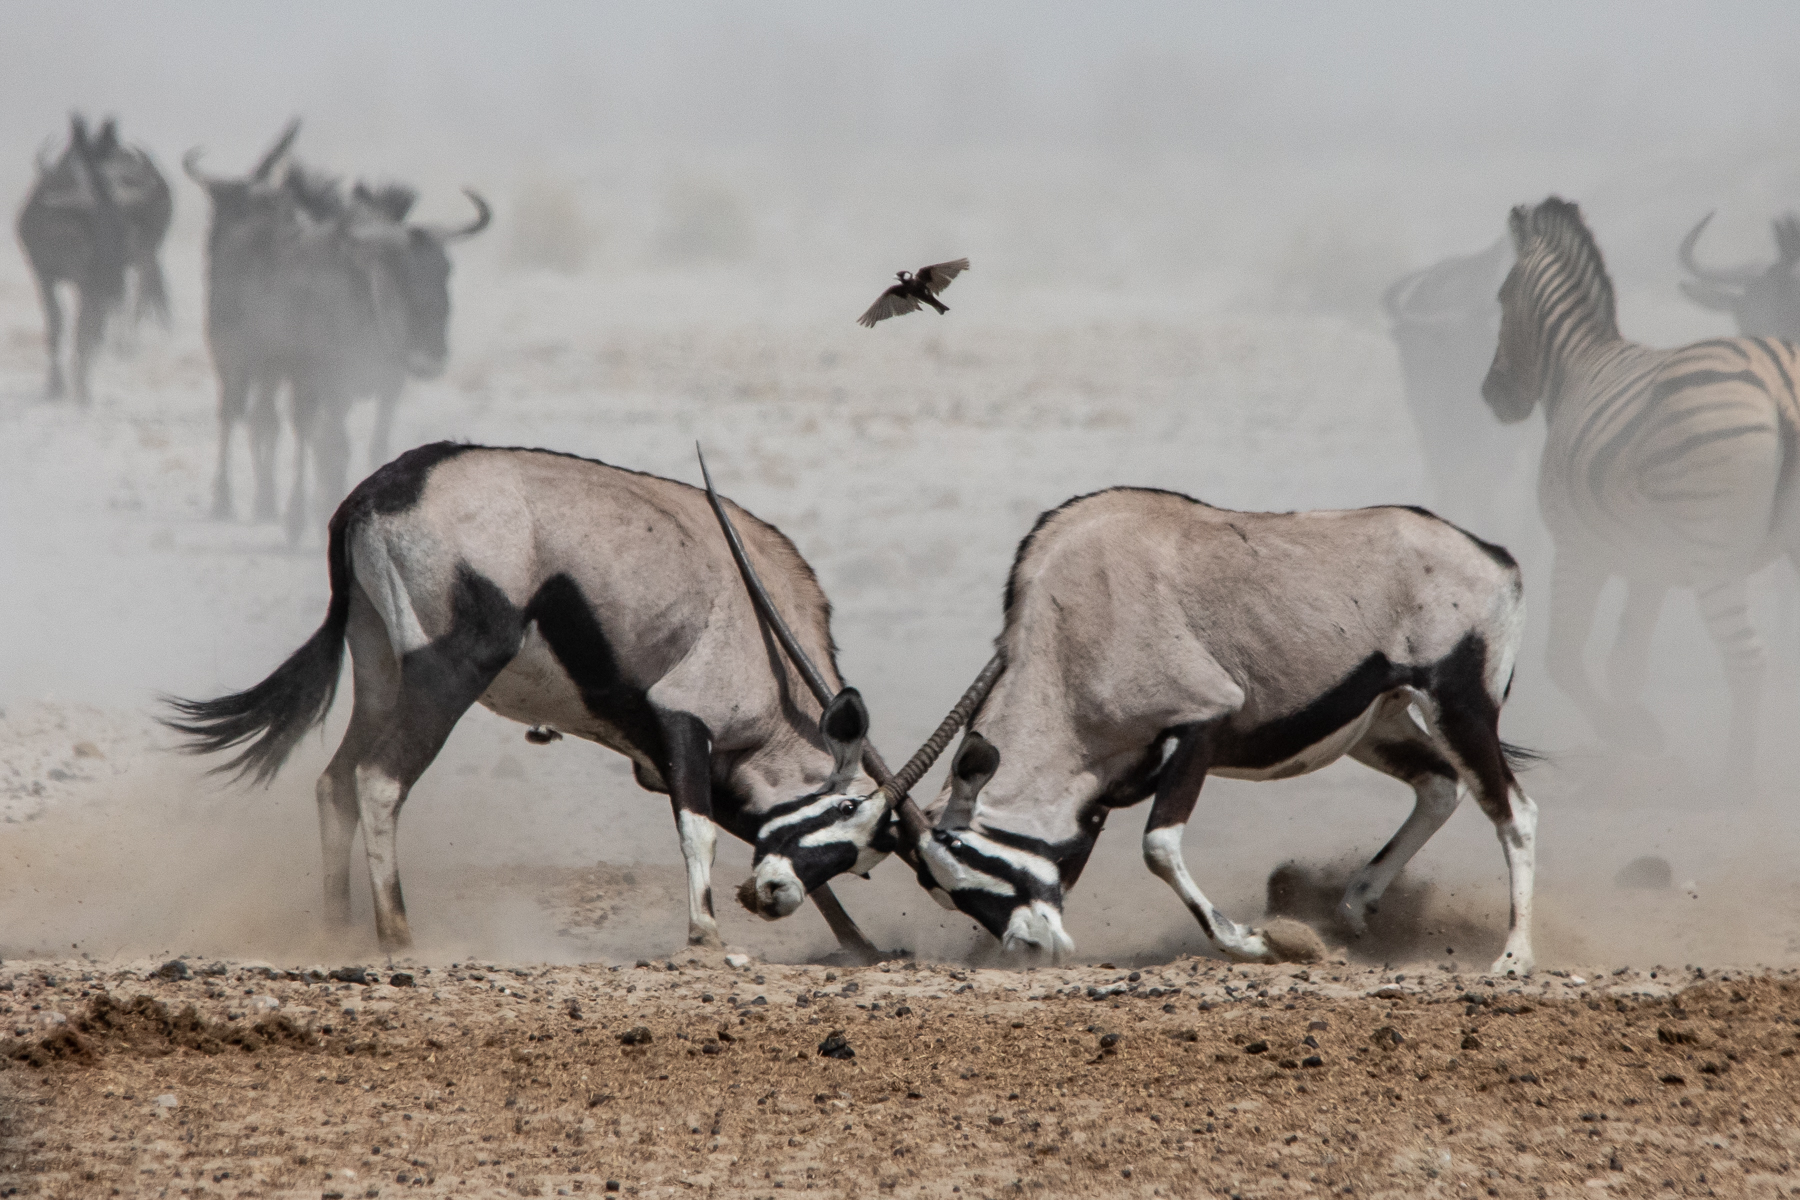 When activity at a waterhole gets tough, the tough Oryx get going